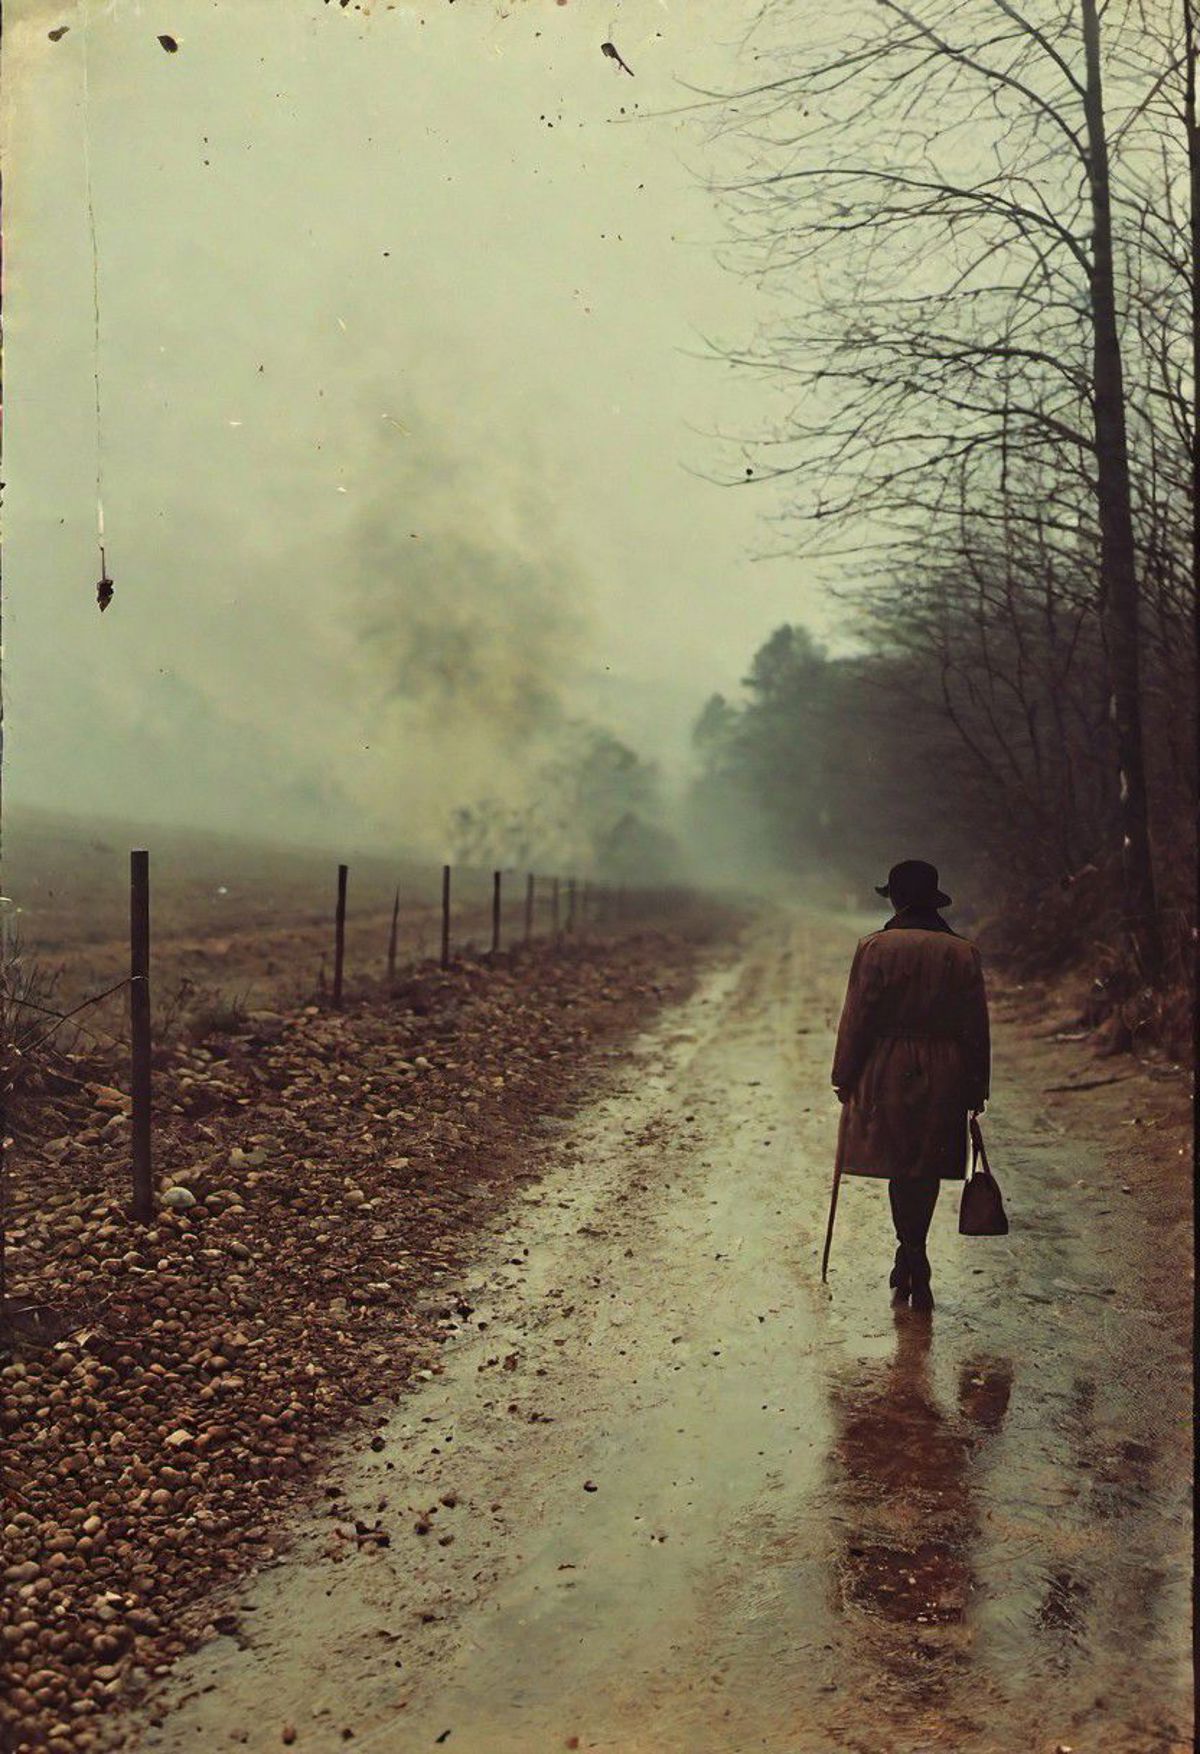 A person walking down a muddy road in the rain.